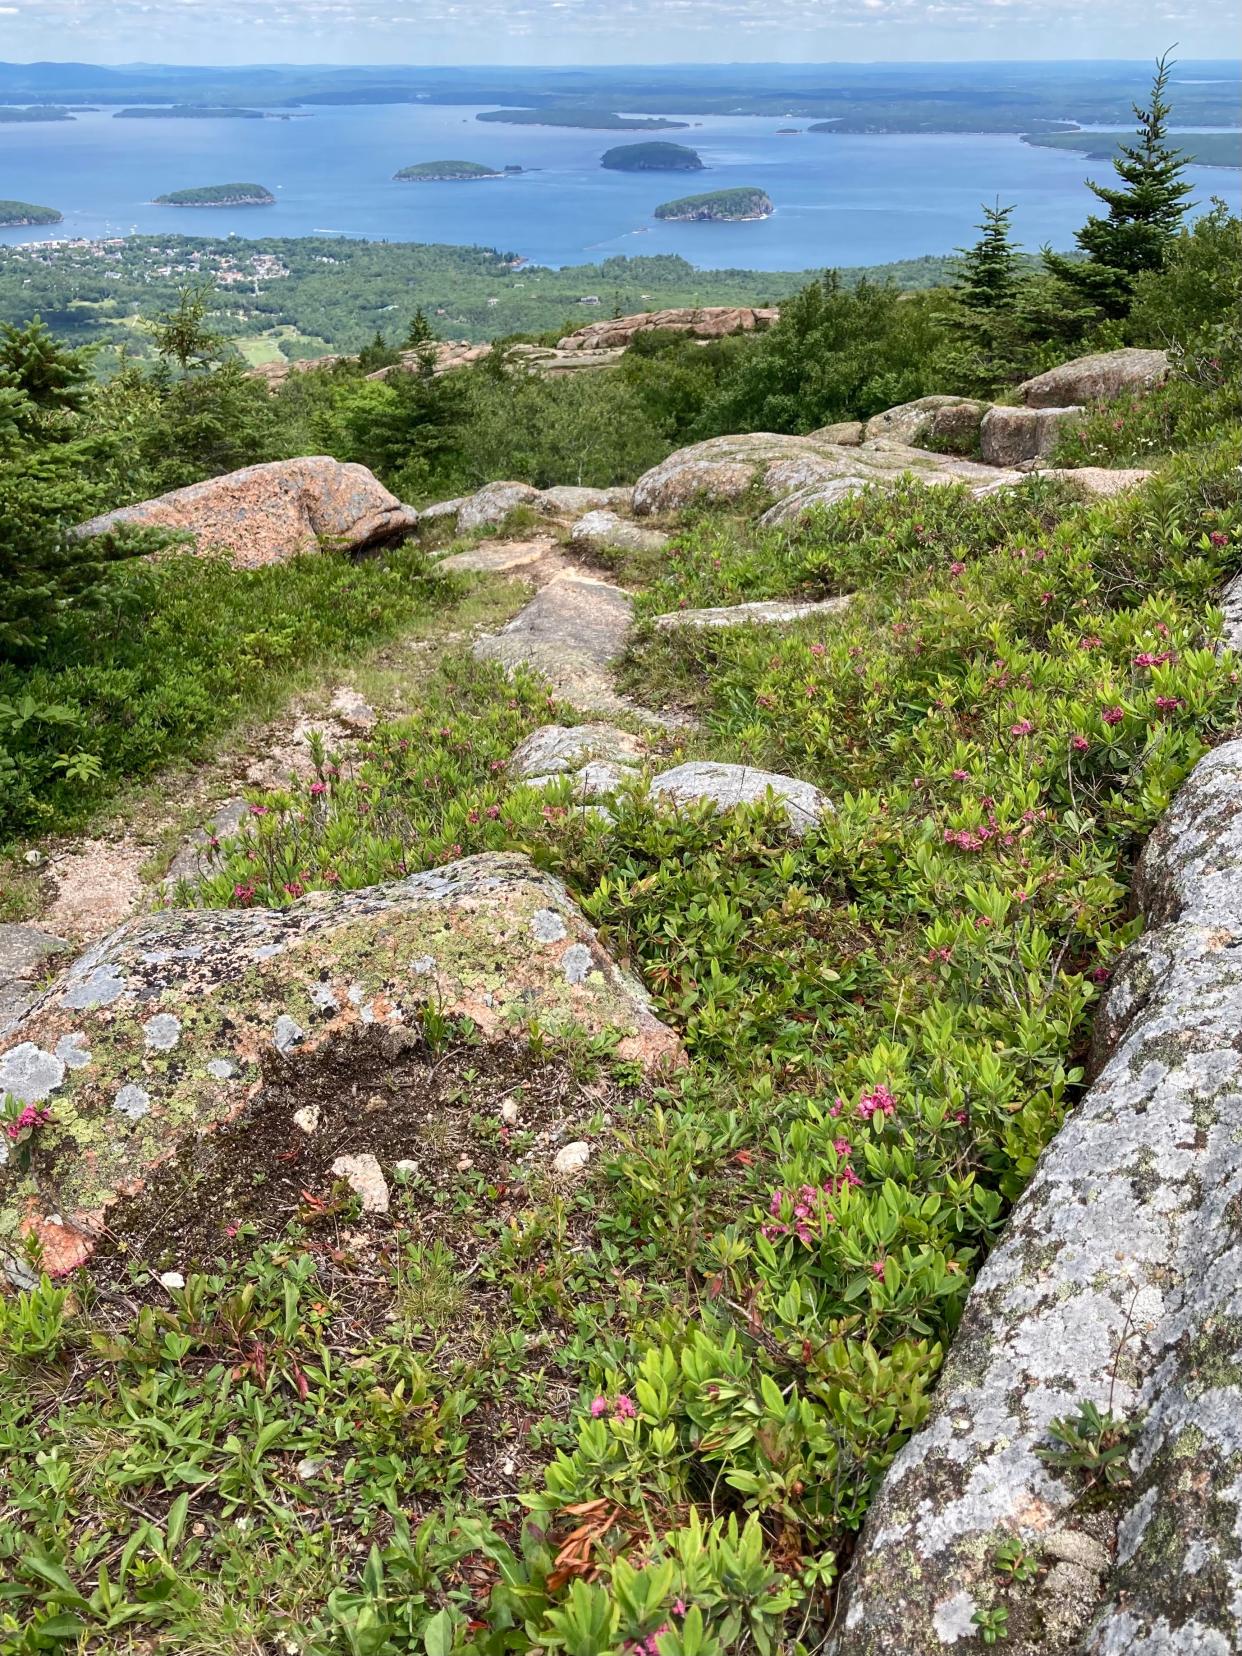 Wildflowers bloom among the rocks atop Cadillac Mountain at Acadia National Park in Maine. This summer, the National Park Service is requiring reservations to drive up Cadillac Summit Road to avoid overcrowding.